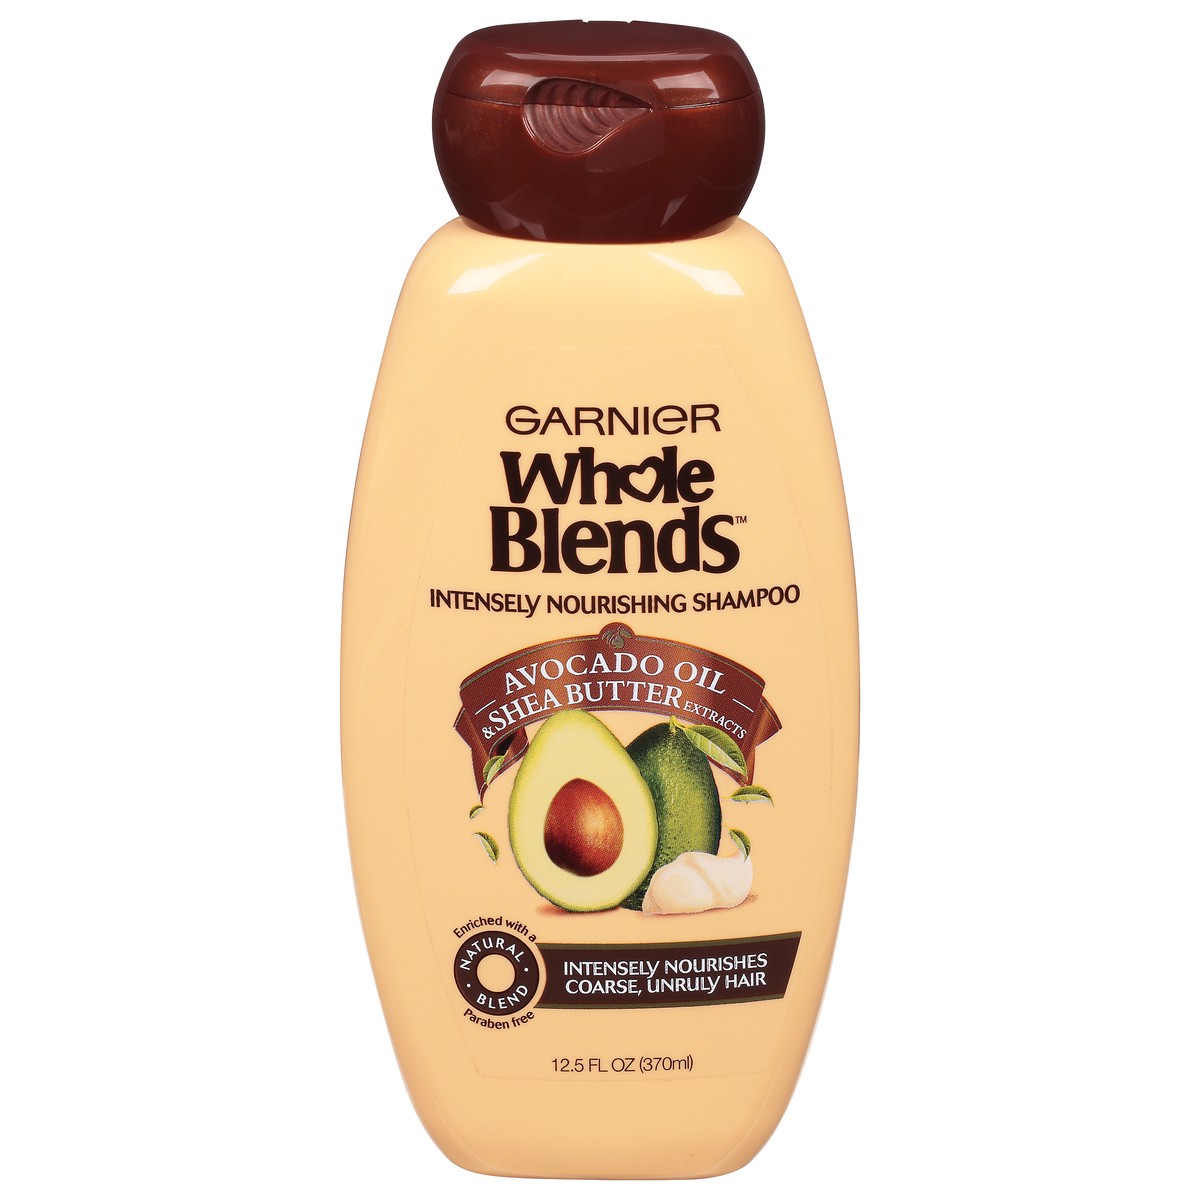 slide 6 of 10, Whole Blends Intensely Nourishing Avocado Oil & Shea Butter Extracts Shampoo 12.5 fl oz, 12.5 fl oz